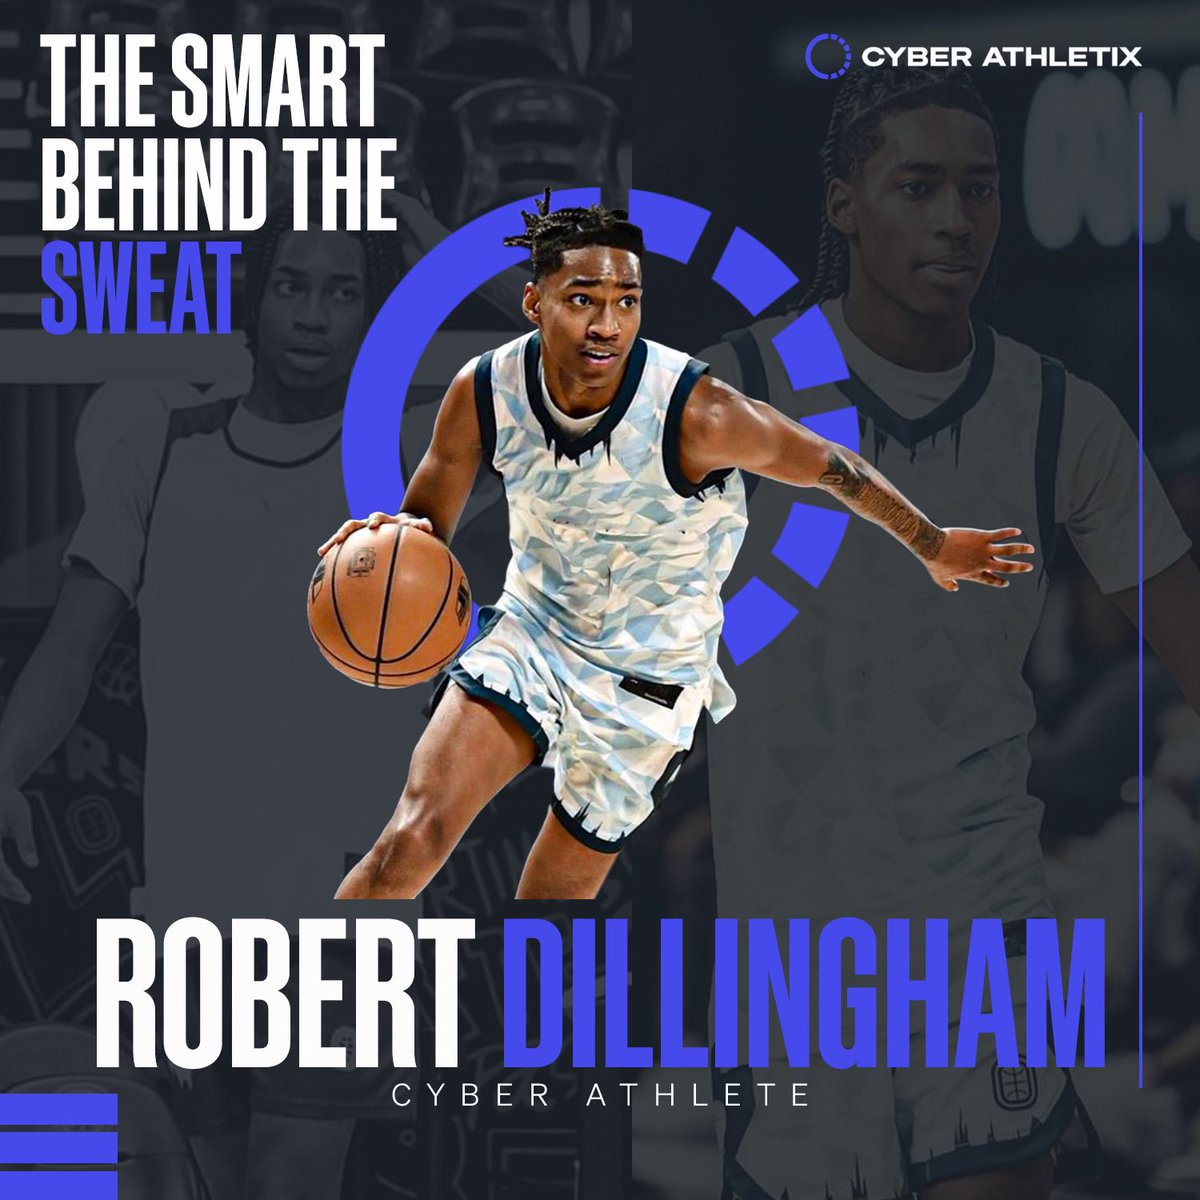 THE SMART BEHIND THE SWEAT‼️

We are excited to announce that Robert Dillingham is an official Cyber Athlete❤️

Robert is a phenomenal athlete but most importantly, he is an even better person❤️

Welcome to the Cyber Athletix family❤️

#cyberathletix #thesmartbehindthesweat